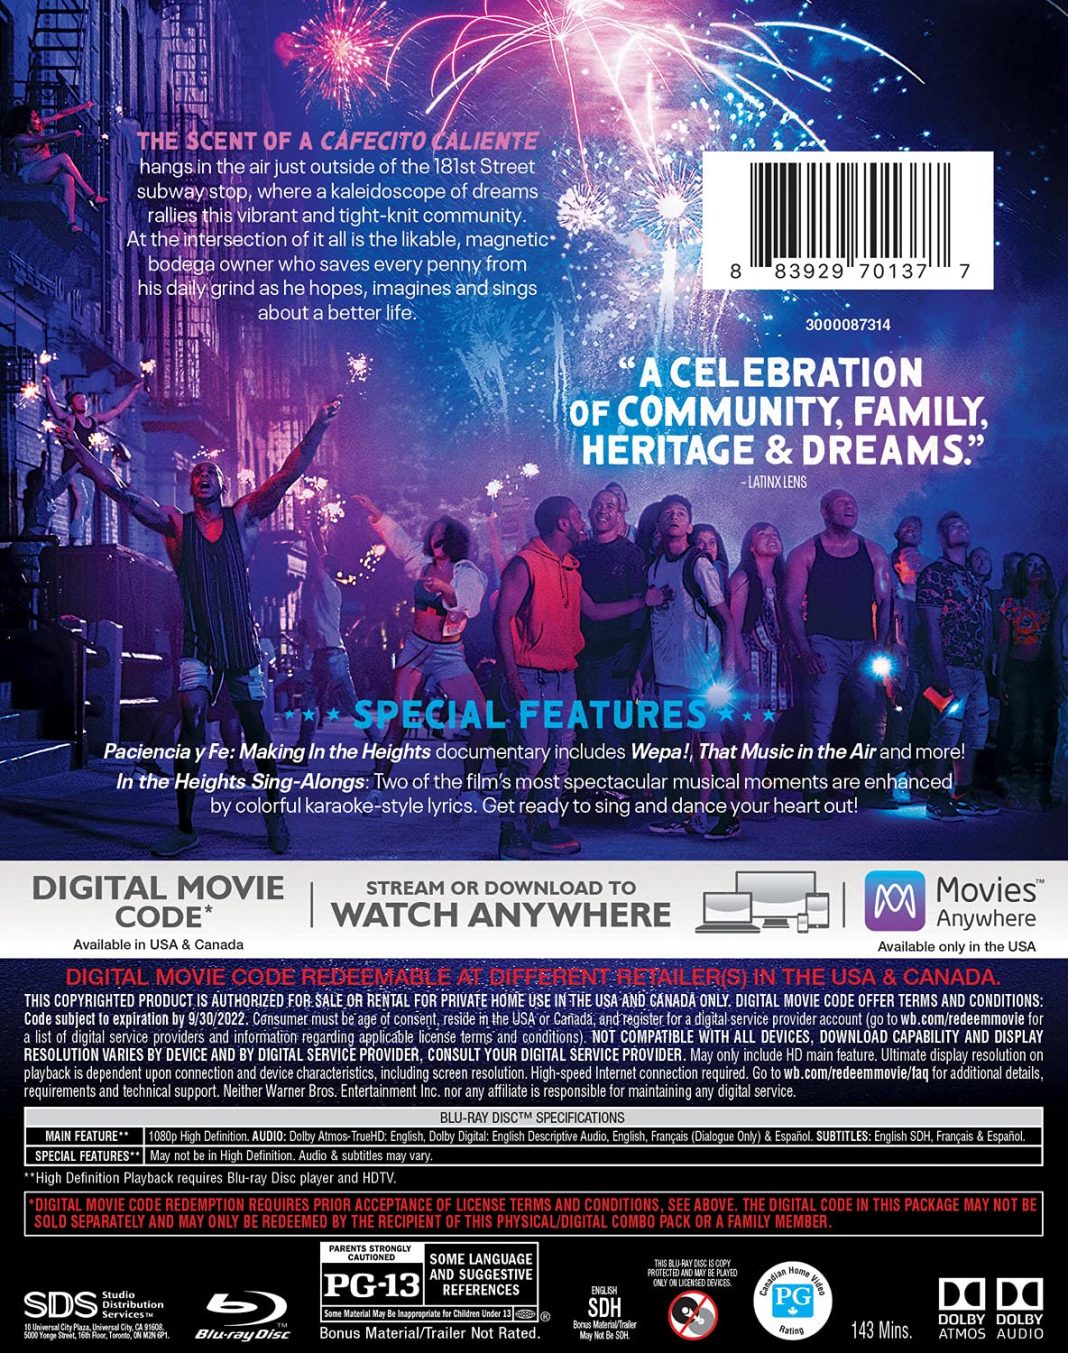 In the Heights to release on Bluray & 4k Bluray w/Dolby